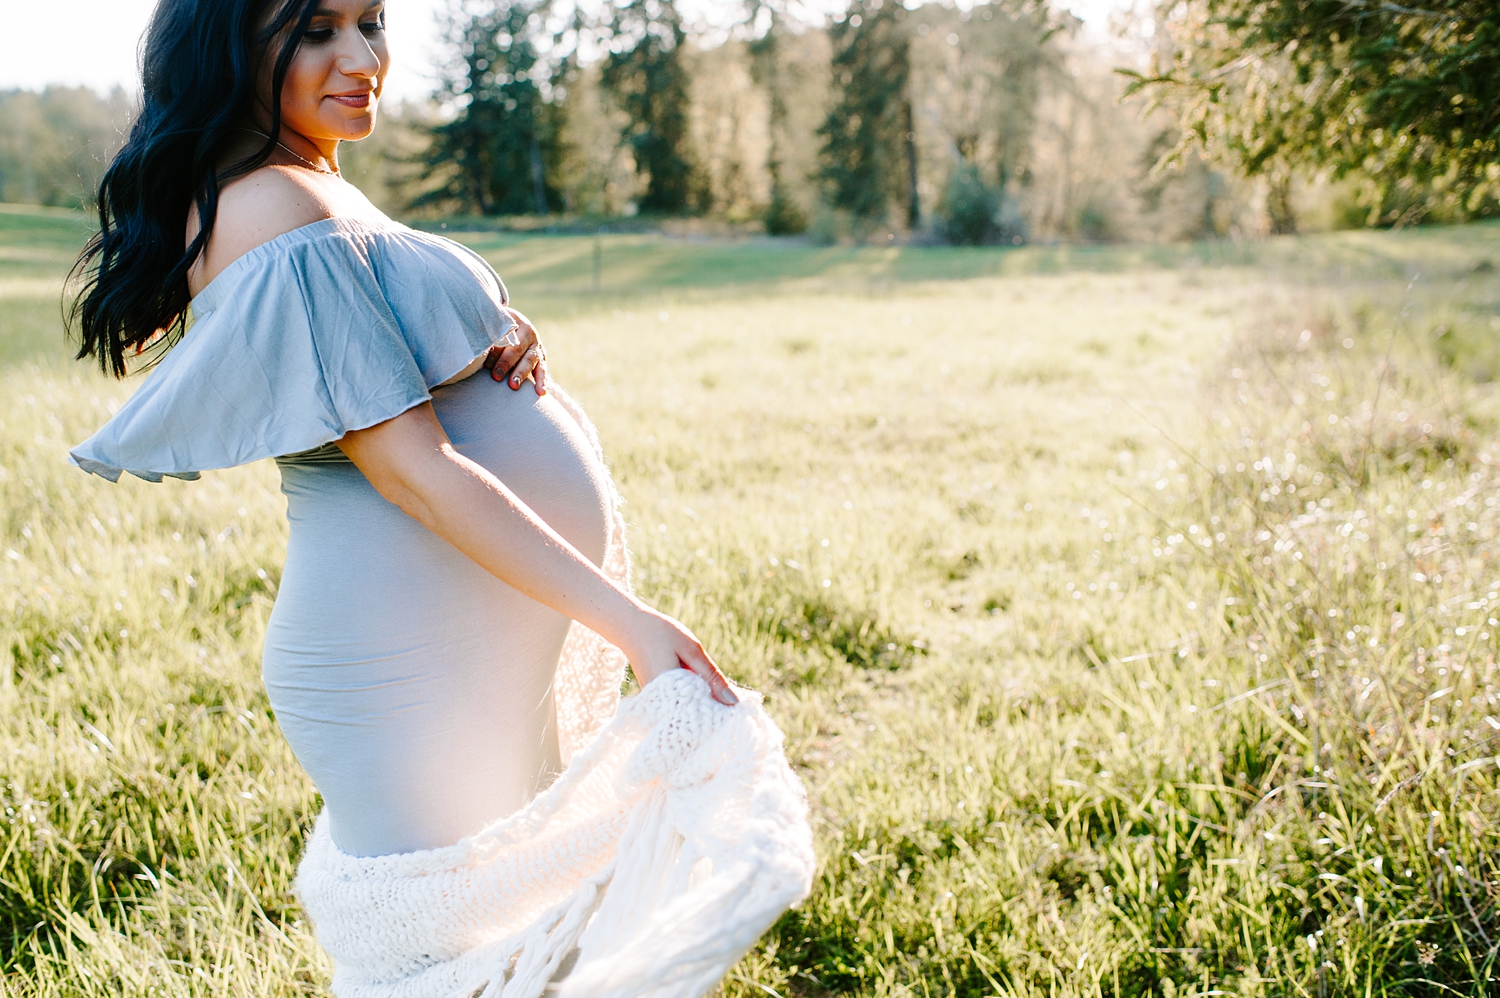 Mama dancing with her baby girl during maternity photoshoot | Meg Newton Photography 